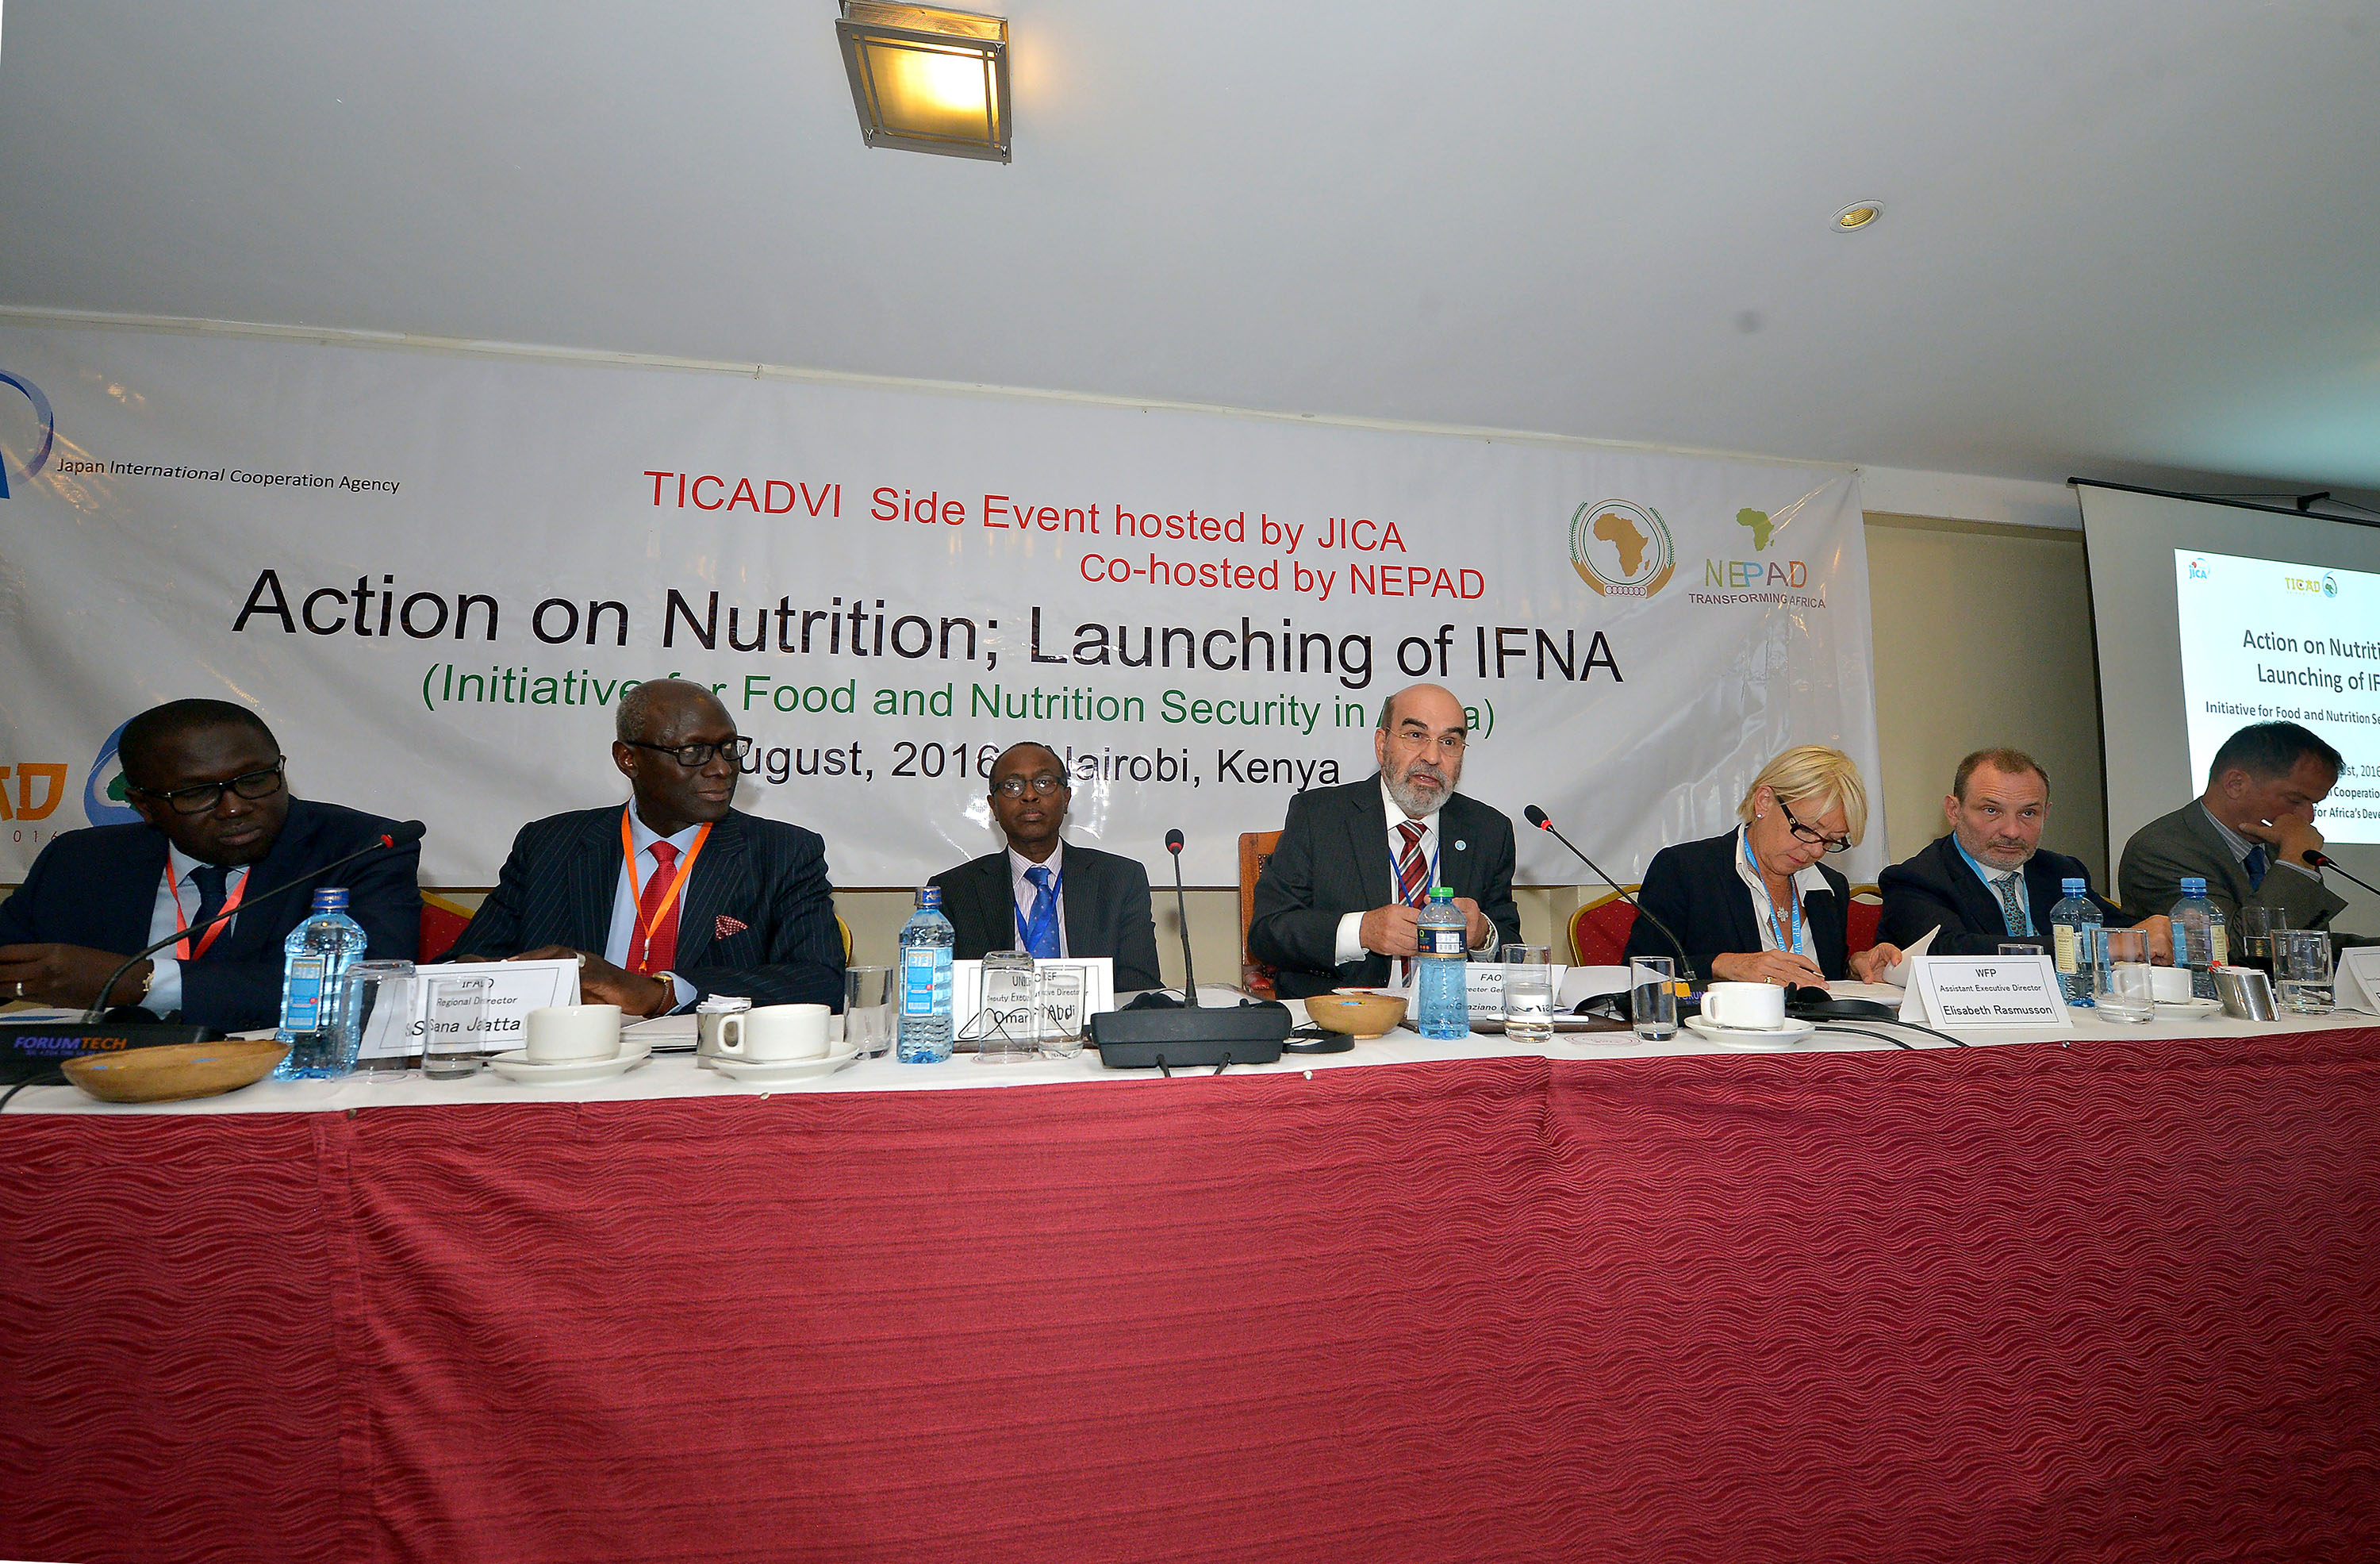 New initiative will accelerate international efforts to alleviate hunger and malnutrition in Africa